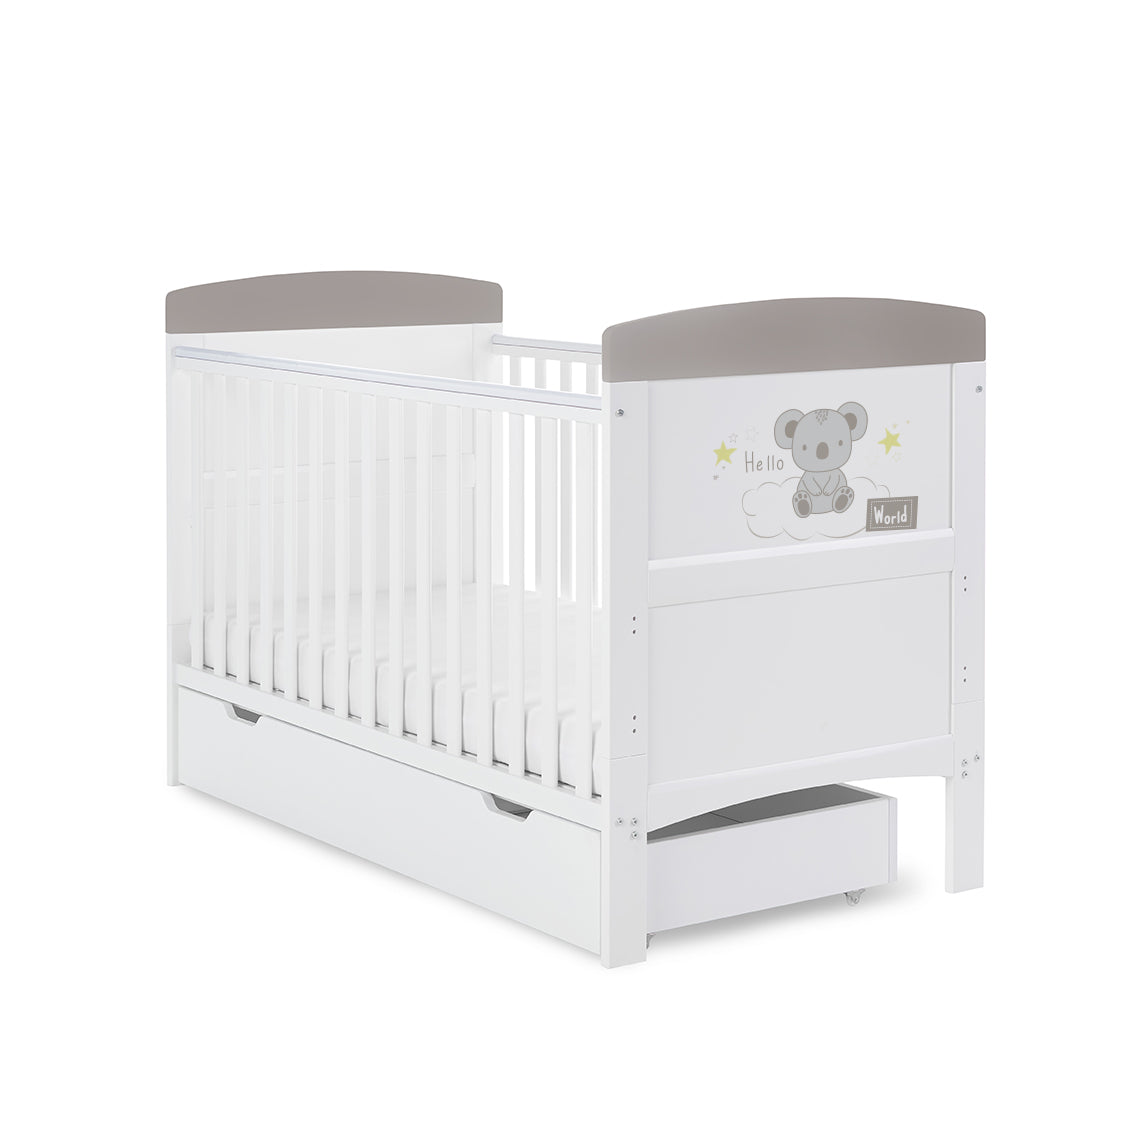 Obaby Grace Inspire Cot Bed & Underdrawer – Hello World Koala – Grey -  | For Your Little One